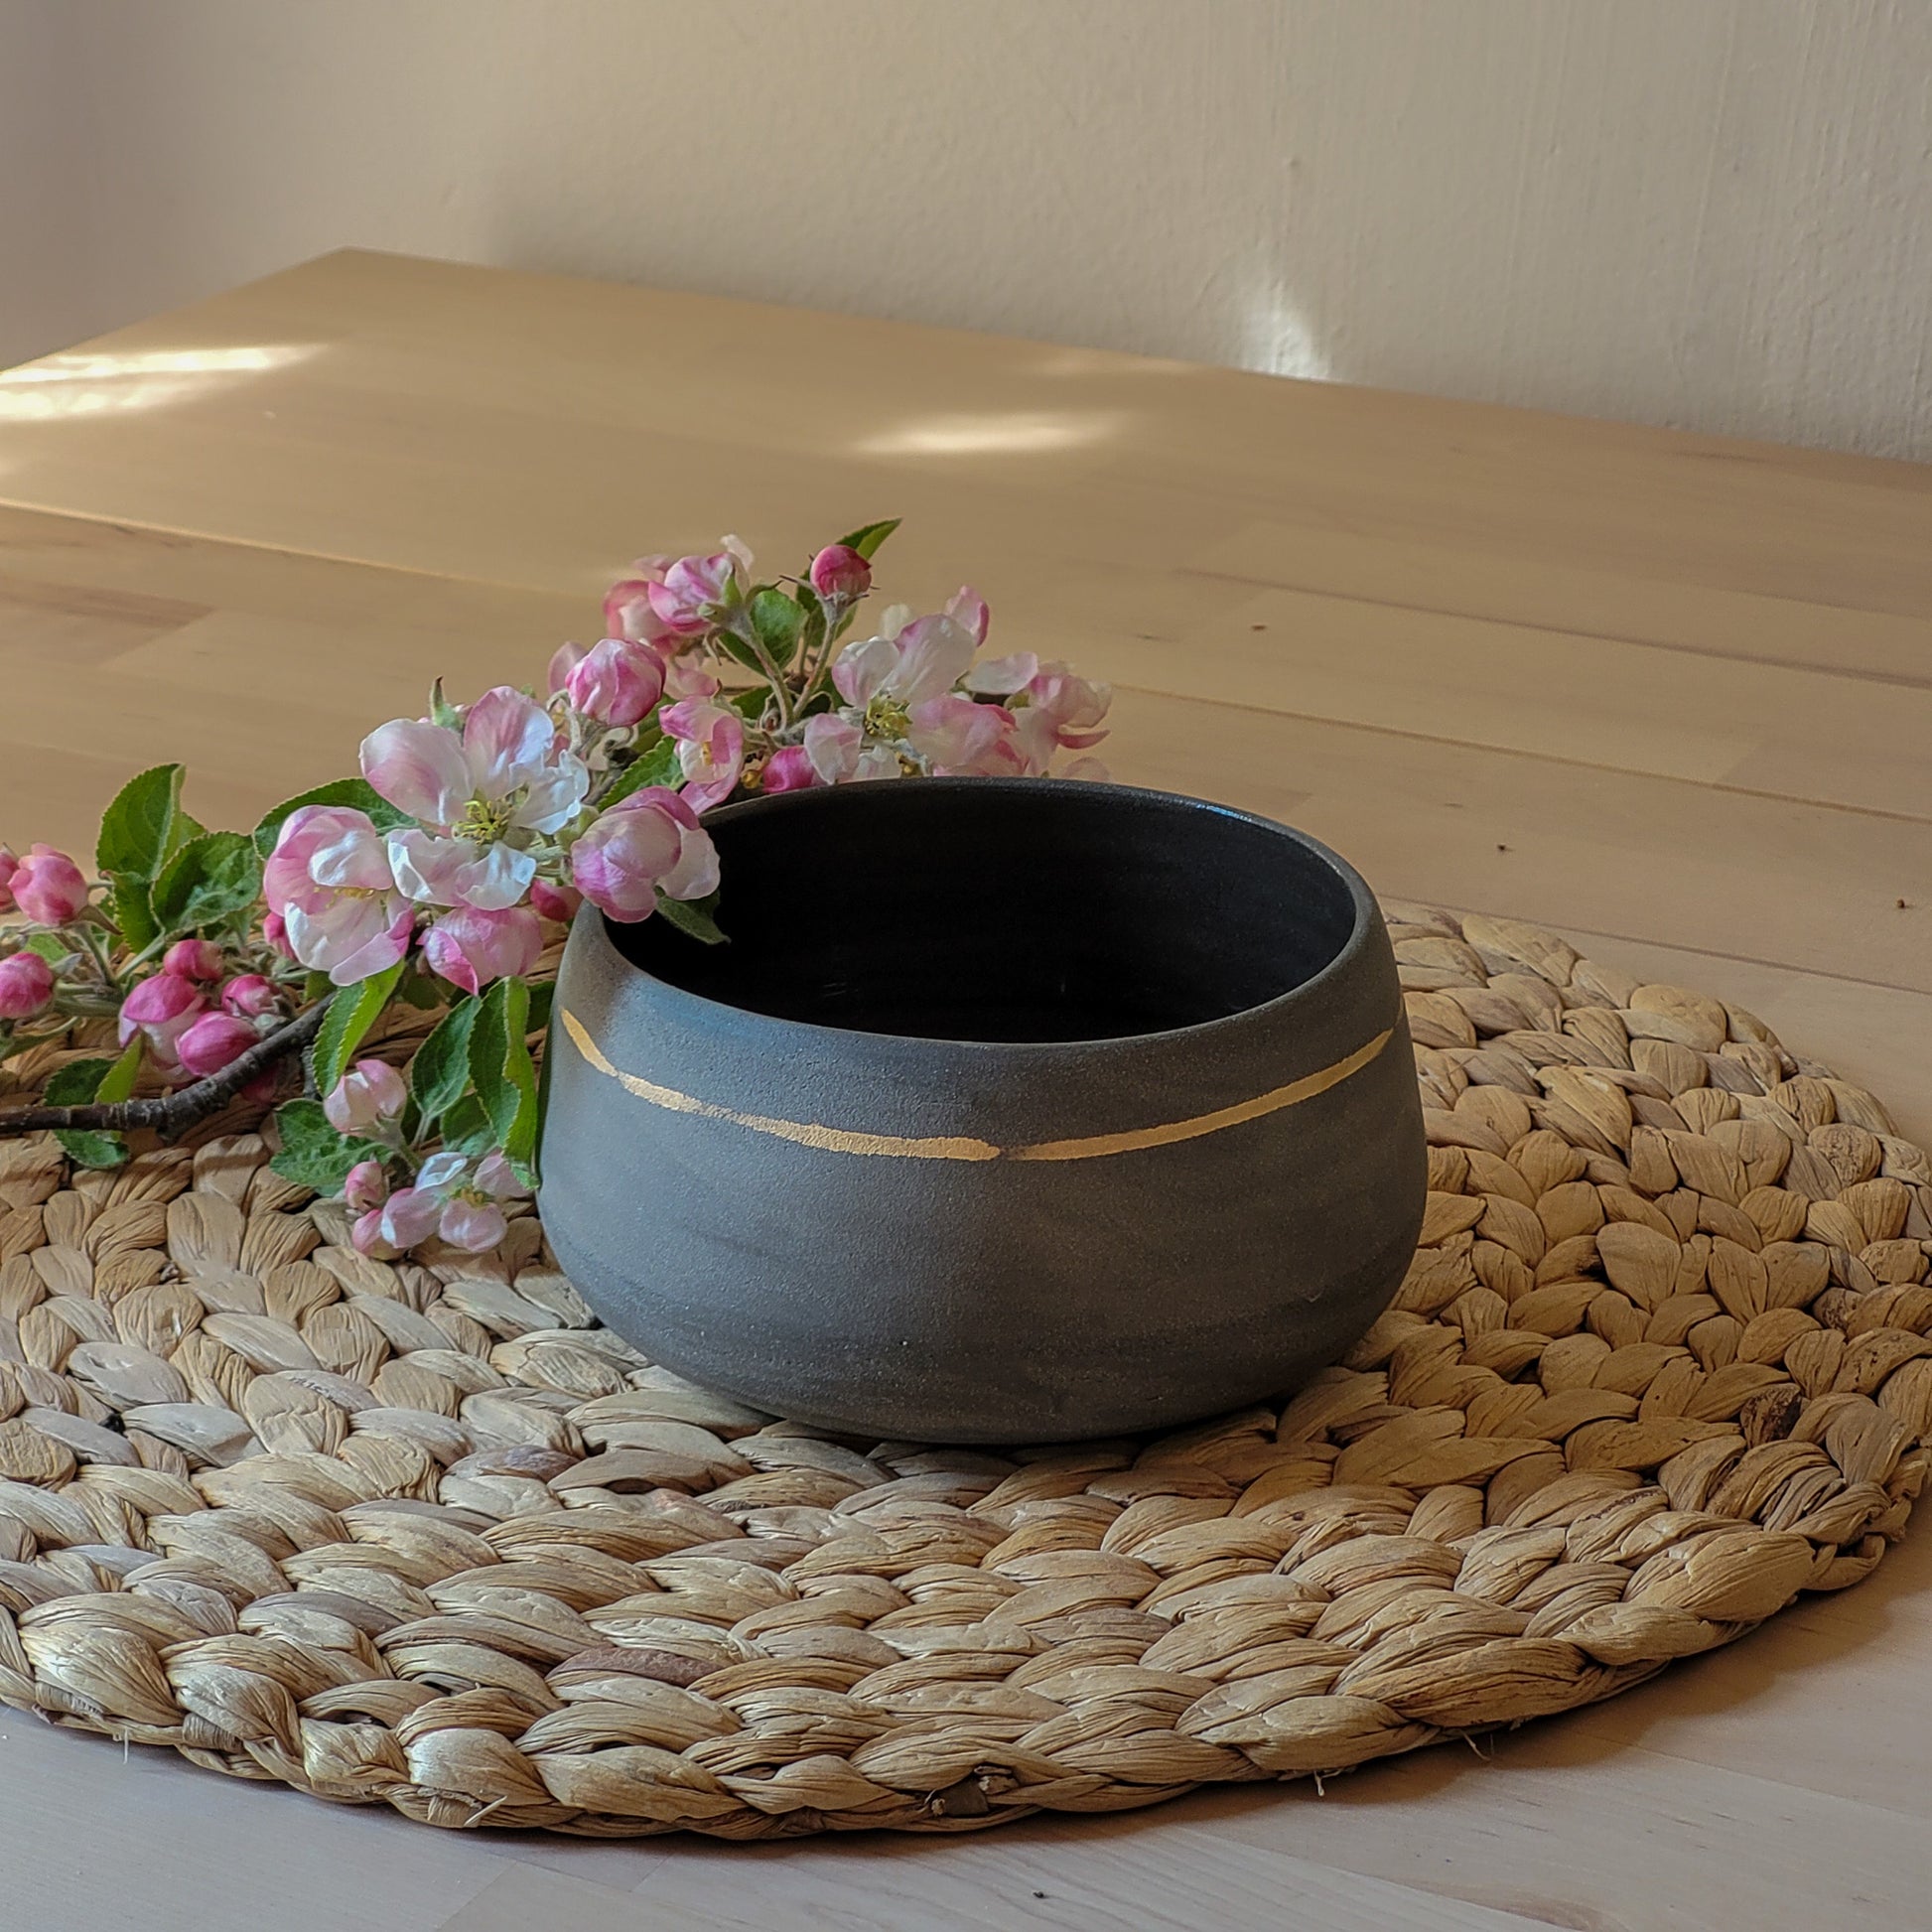 This handmade, pottery, made in ceramic studio Jogita Art Studio gray serving bowl has a gold detail and is the perfect size for all your favorite foods.